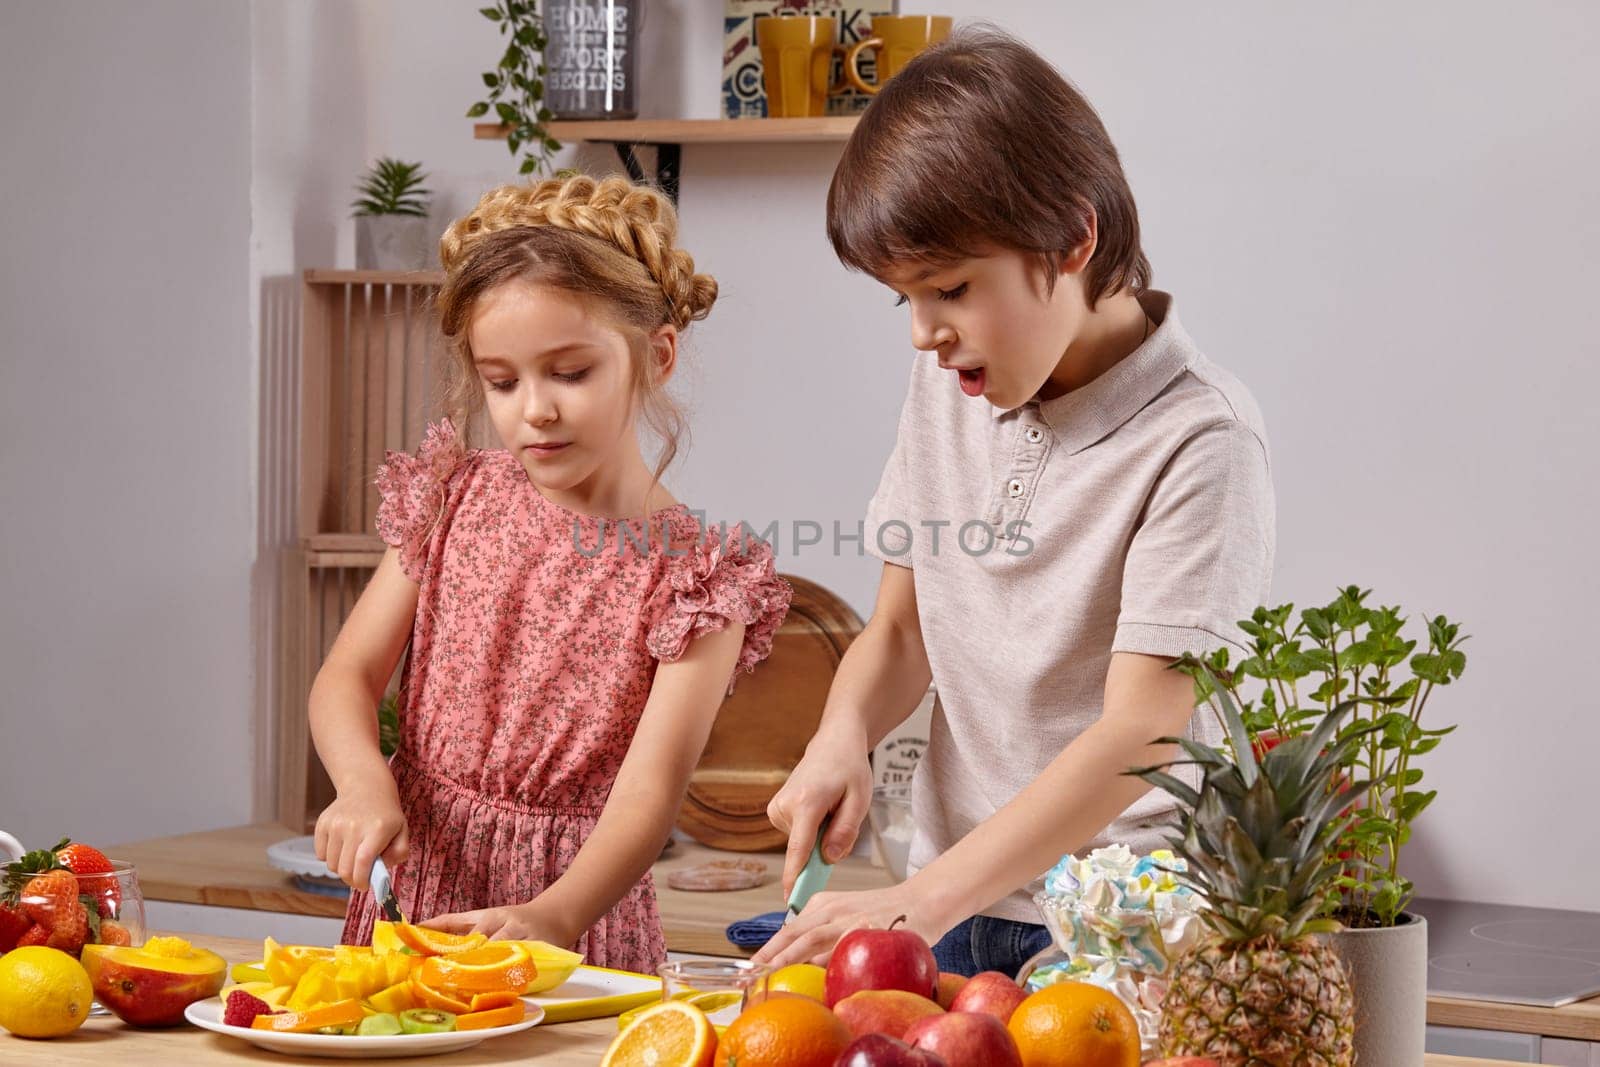 Cute cook couple. Little boy with brown hair dressed in a light t-shirt and jeans and a beautiful little girl with a braid in her hairstyle, dressed in a pink dress are cutting fruits together at a kitchen against a white wall with shelves on it.